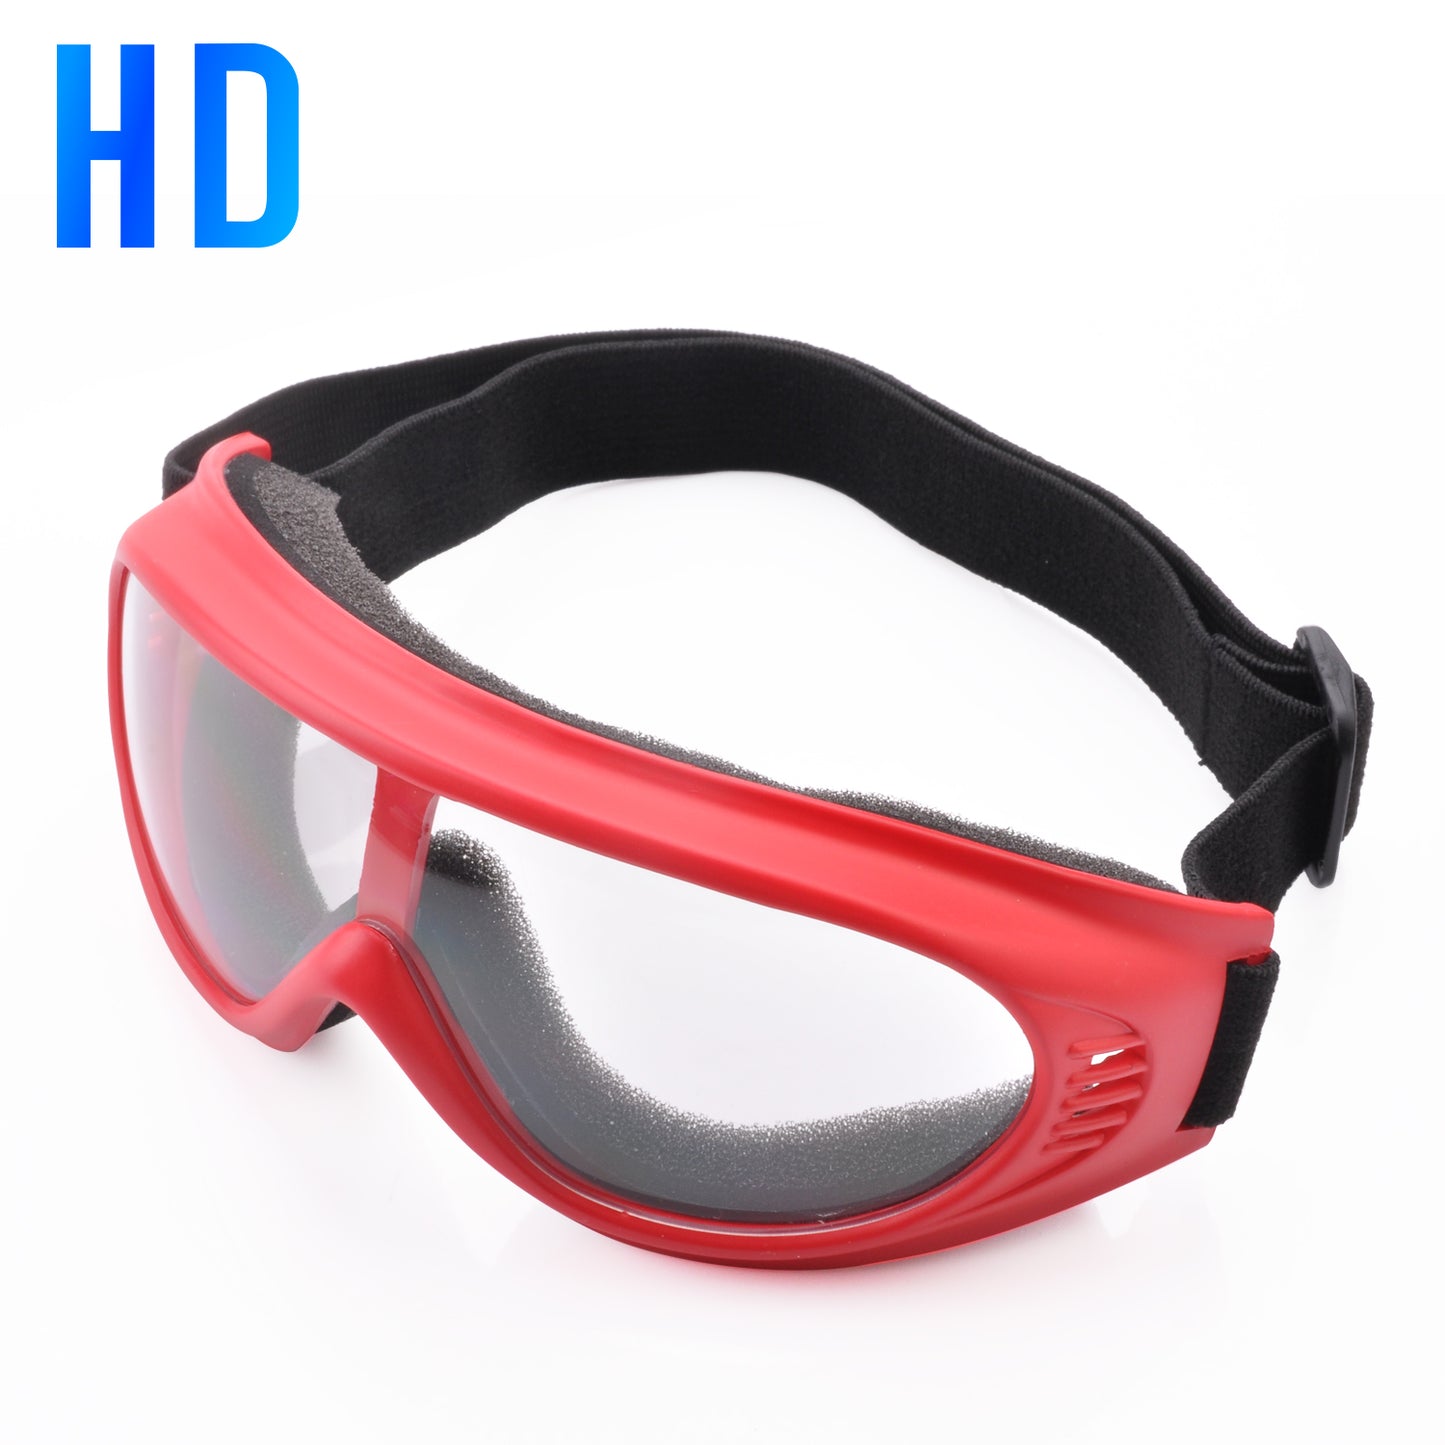 SAFEYEAR Anti Fog Safety Goggles for Kids with Clear HD Anti Scratch Resistant Lenses,No-Slip Foam,Adjustable Neck Cord,UV Protection Safety Glasses for DIY,Lab,Games Shooting, Grinding,Cycling,MTB